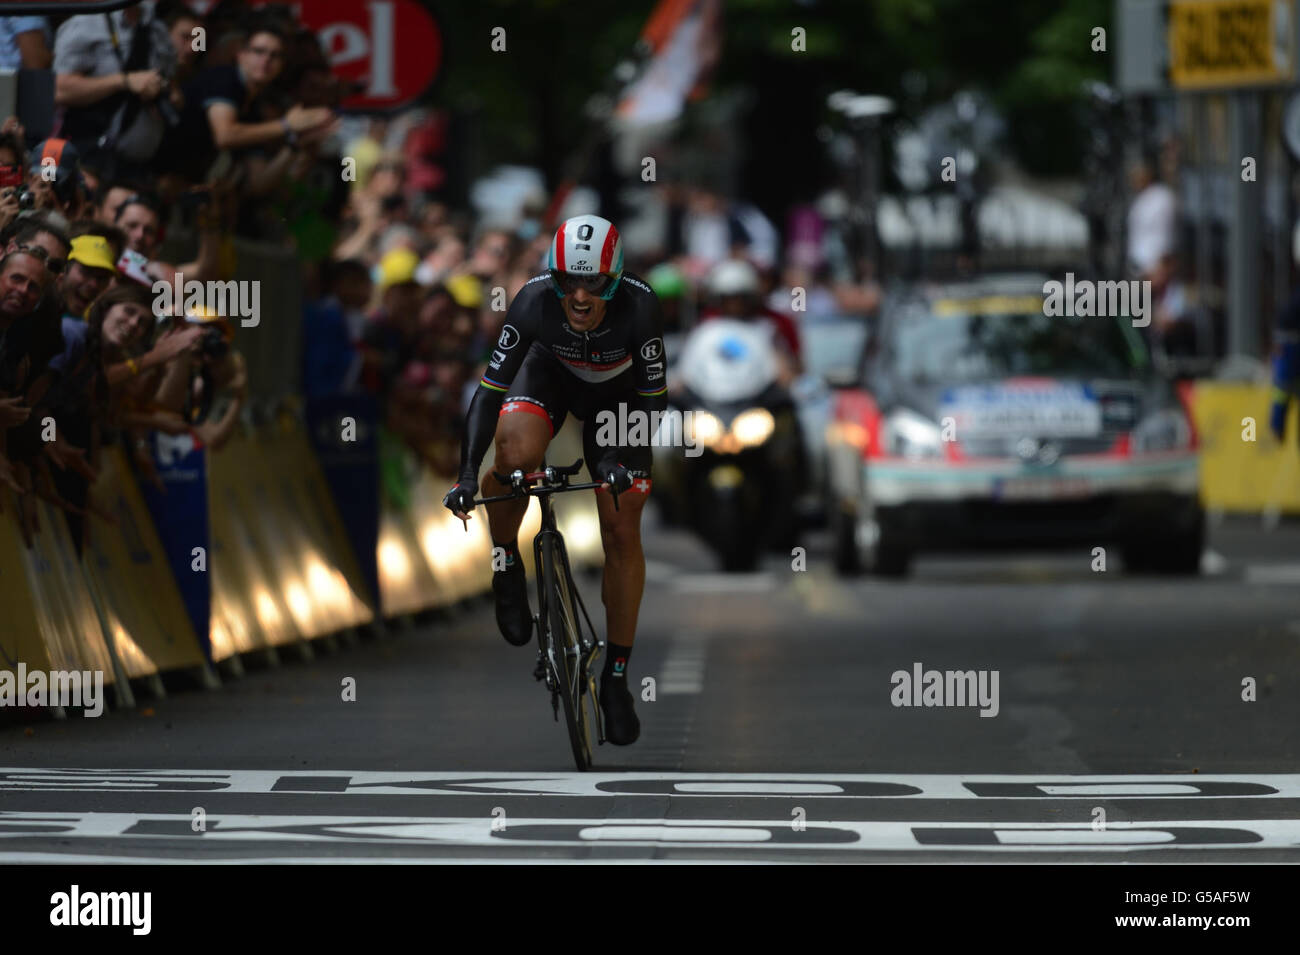 Fabian Cancellara wins the Prologue Stage of the 2012 Tour de France in Liege, Belgium. Stock Photo